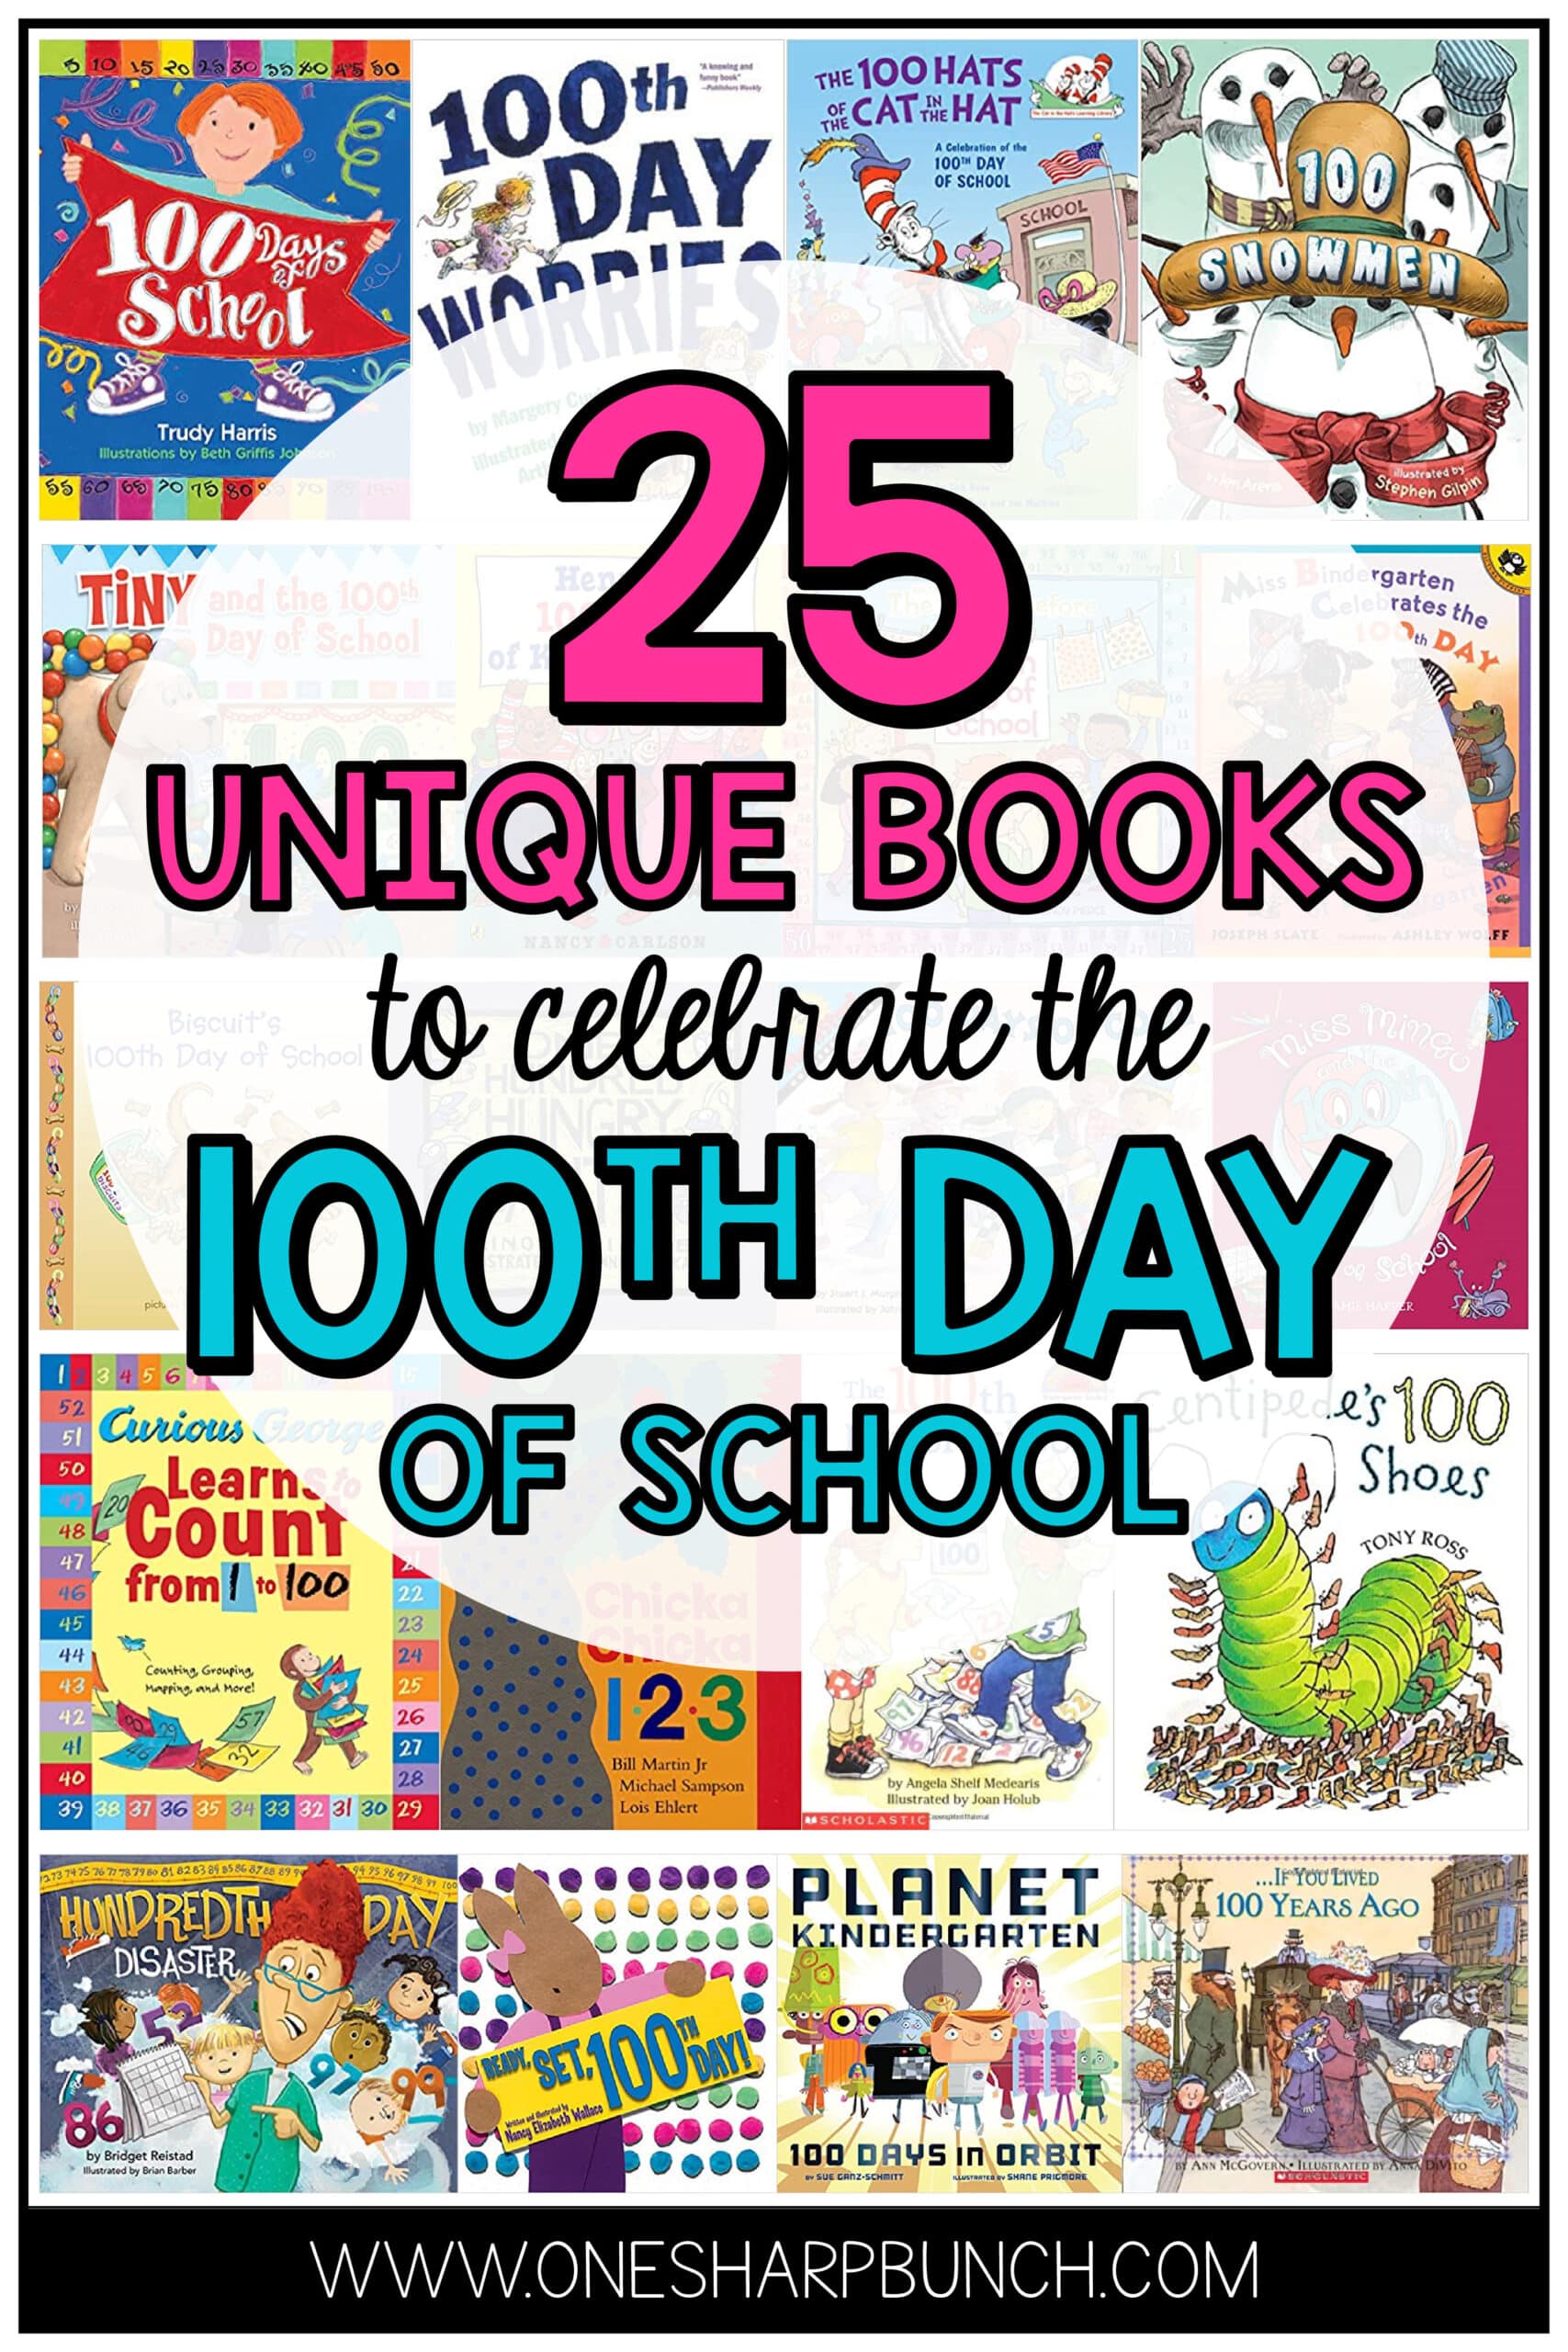 Celebrate the 100th Day of School with these 25 math, literacy, science and social studies 100th Day books! These picture books for the 100th Day of School pair well with your favorite 100th Day of School activities, 100th Day crafts, 100th Day of School necklaces and 100th Day collections in preschool, kindergarten or first grade!